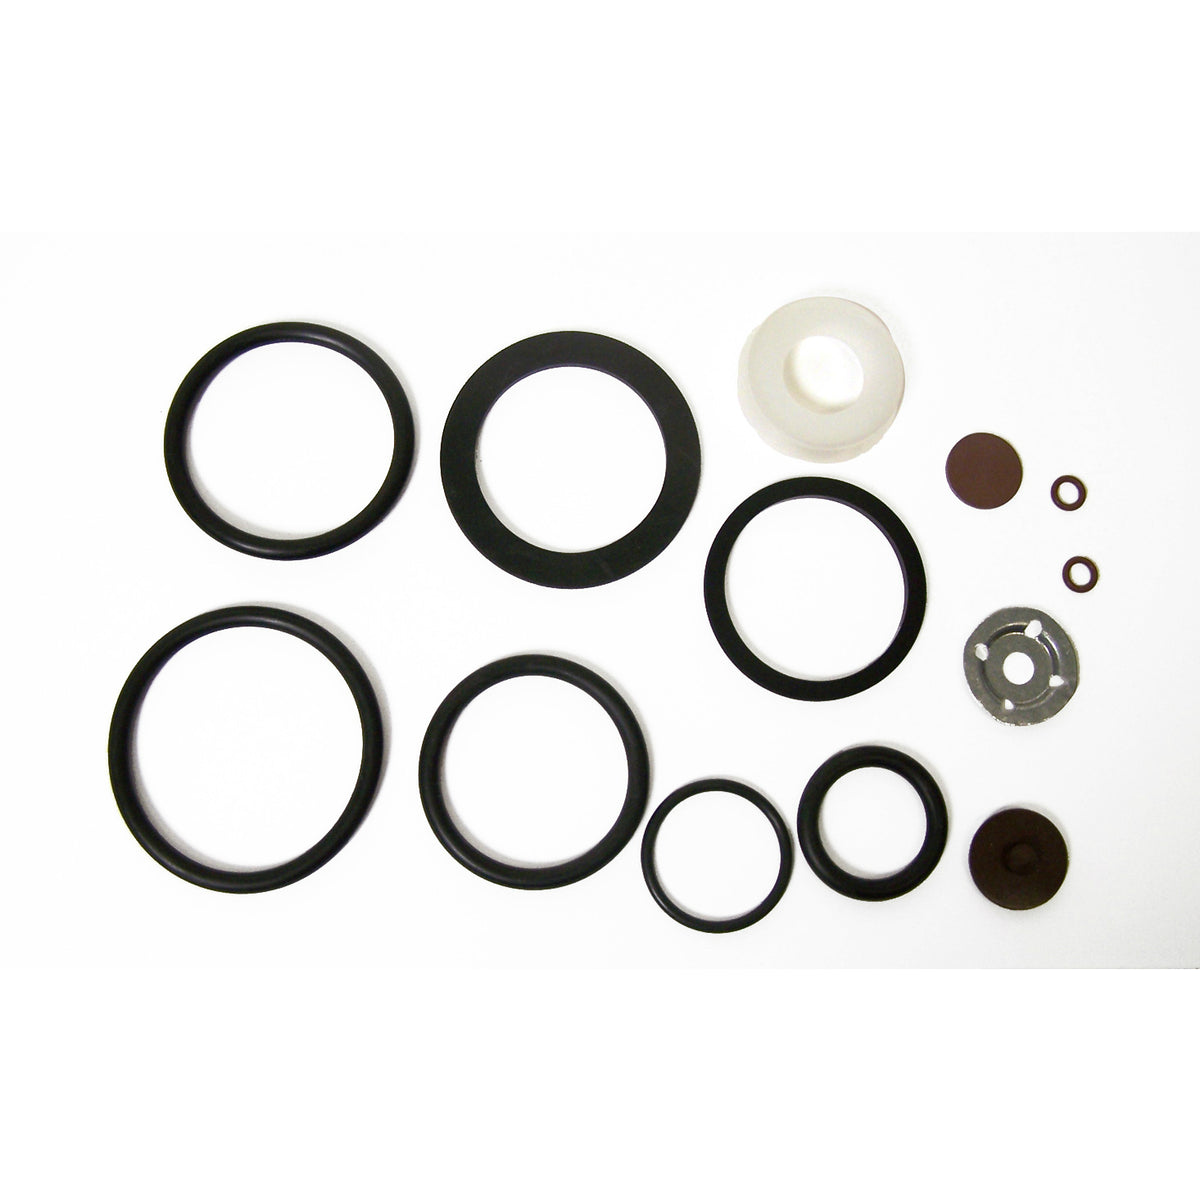 Chapin 6-1925 Seal & Gasket Kit for Chapin Industrial Sprayers